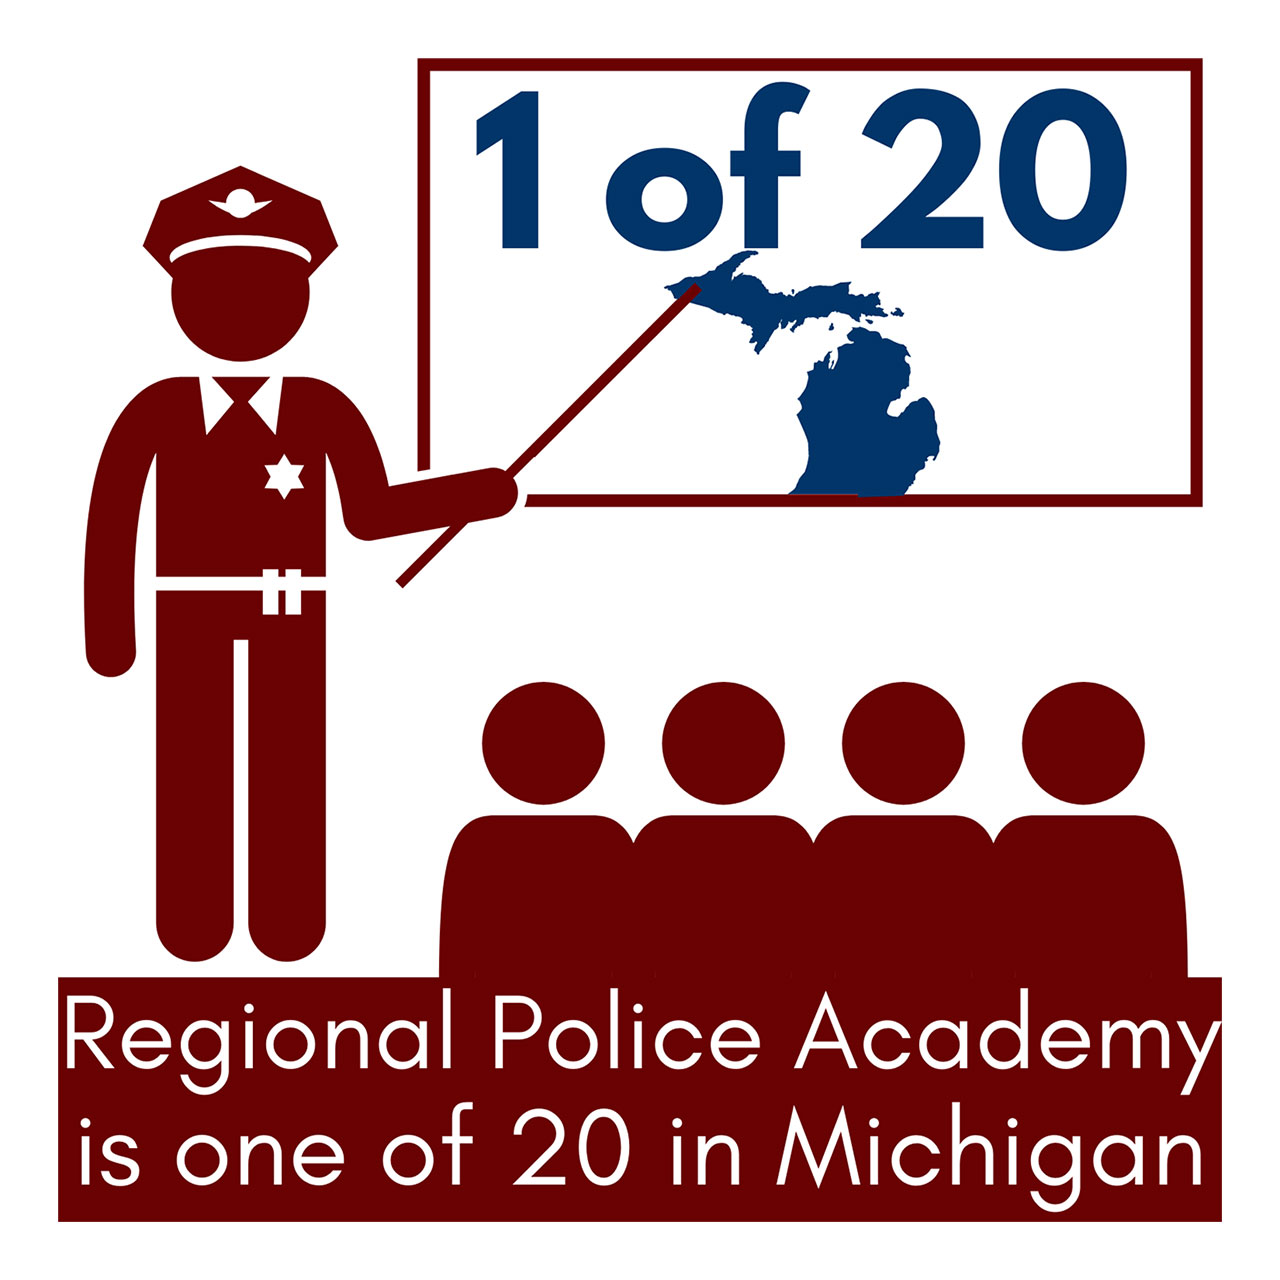 One of 20 academies in Michigan